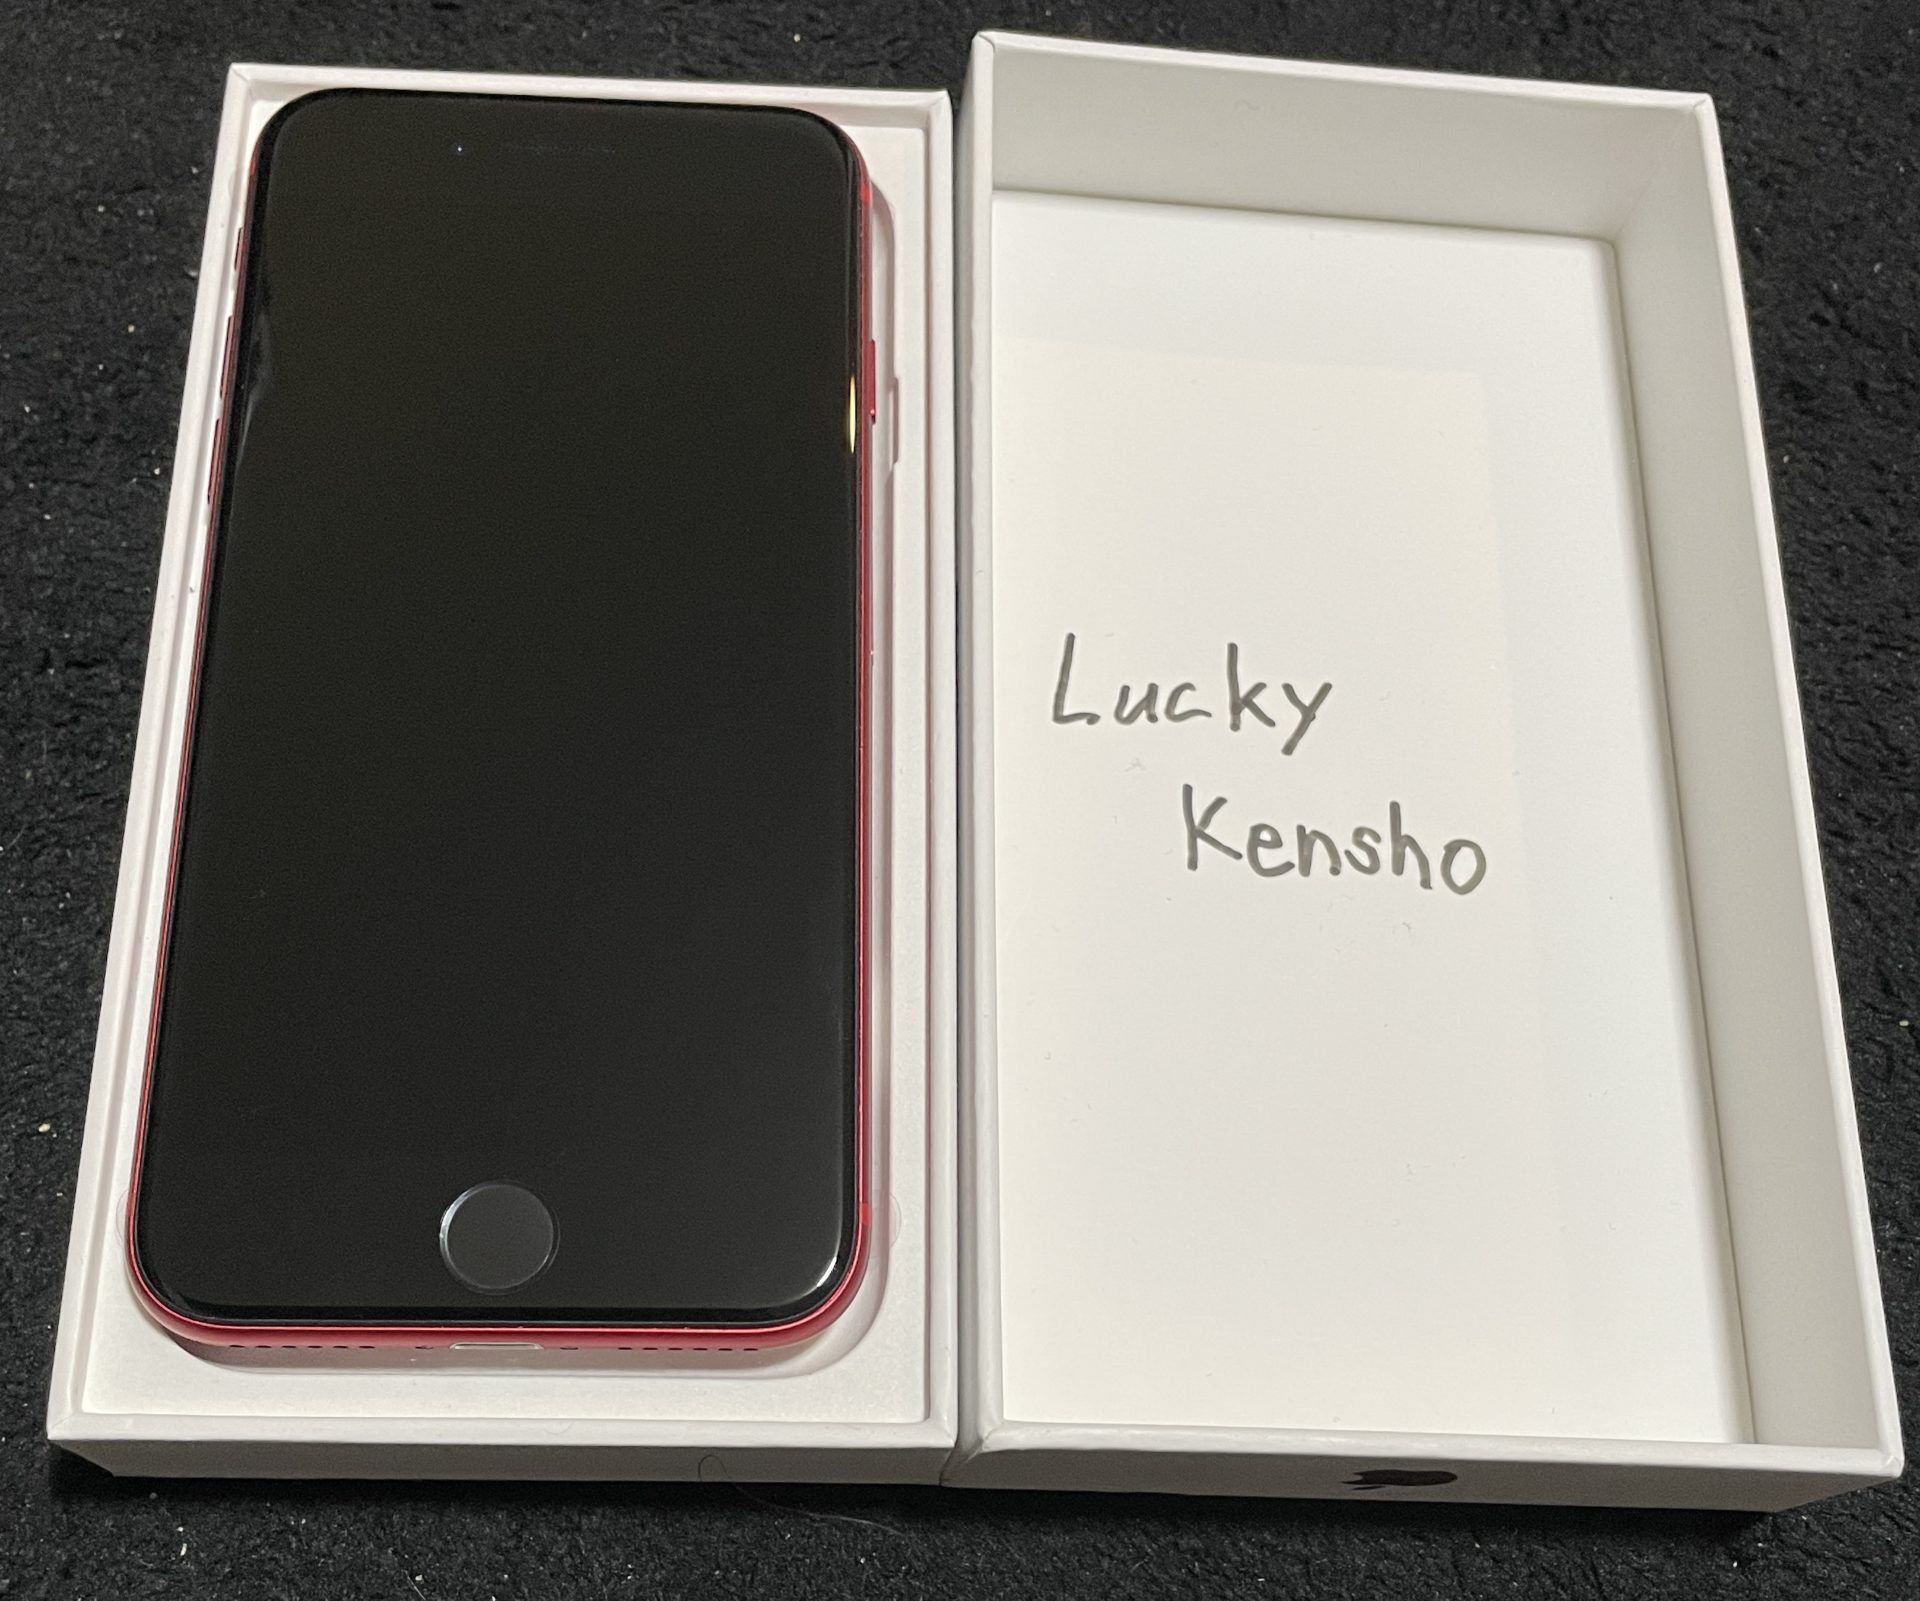 Why Buying an iPhone in Japan Requires Writing Your Name on the Box